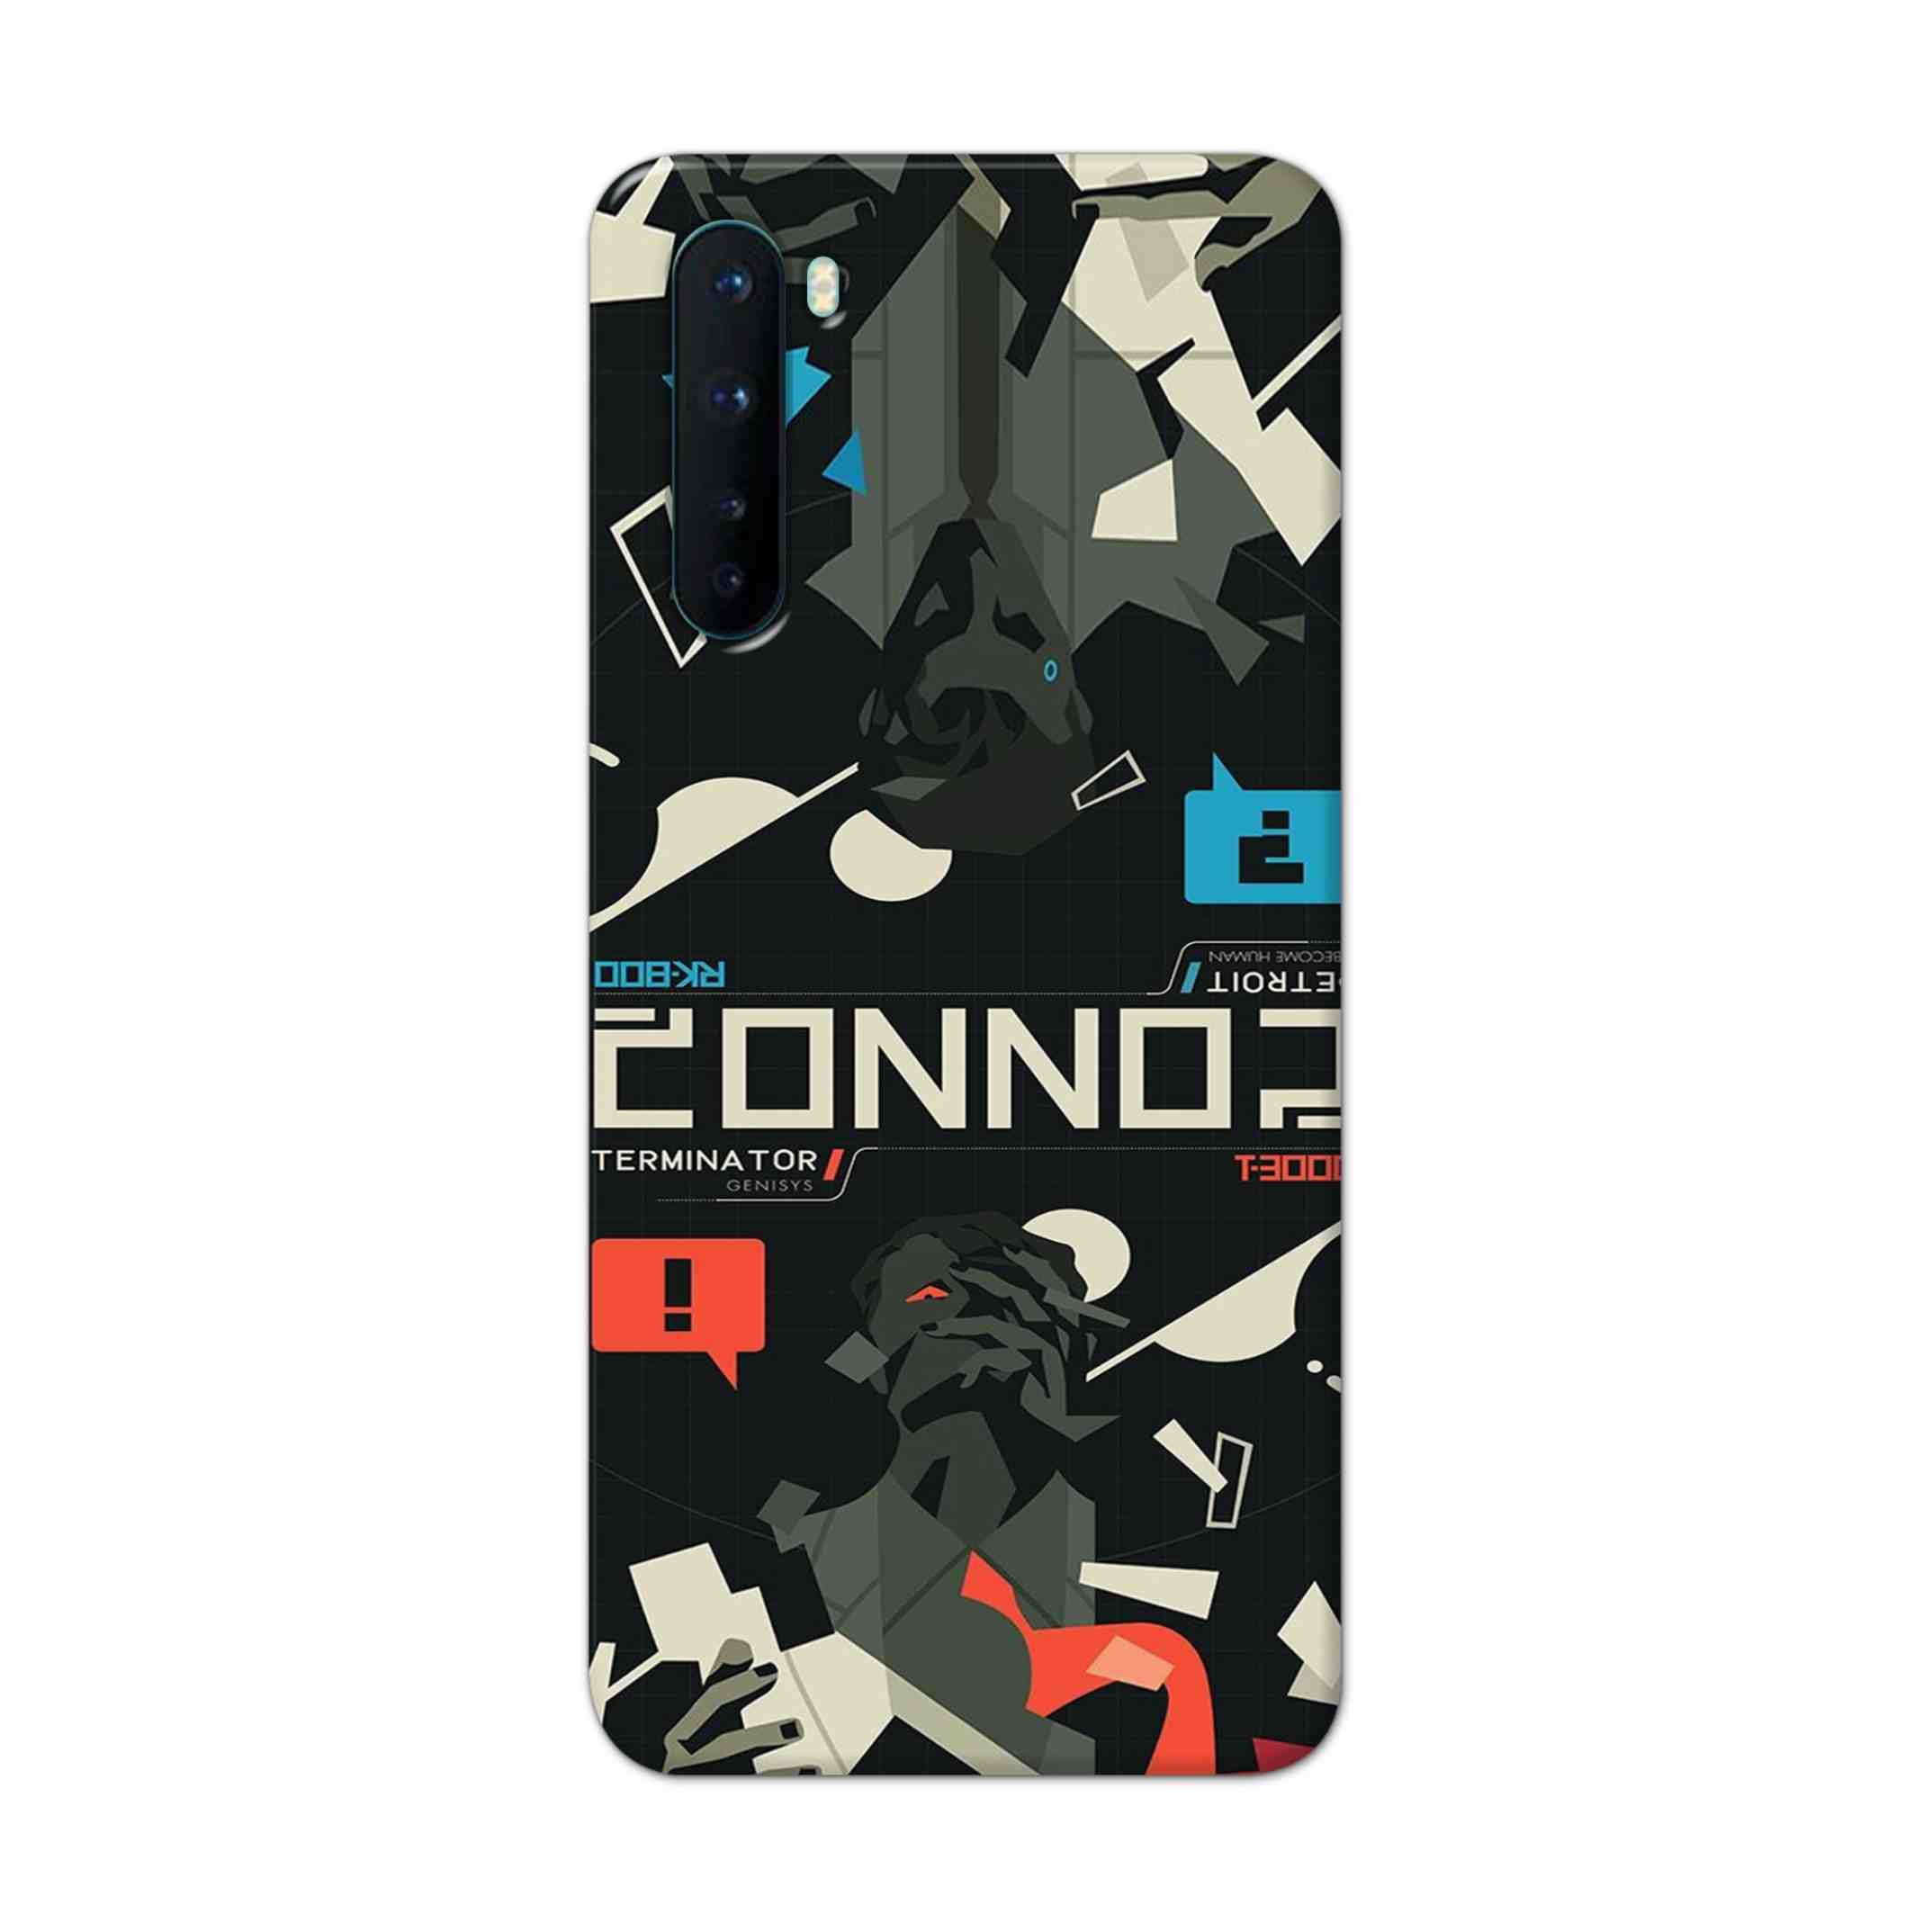 Buy Terminator Hard Back Mobile Phone Case Cover For OnePlus Nord Online